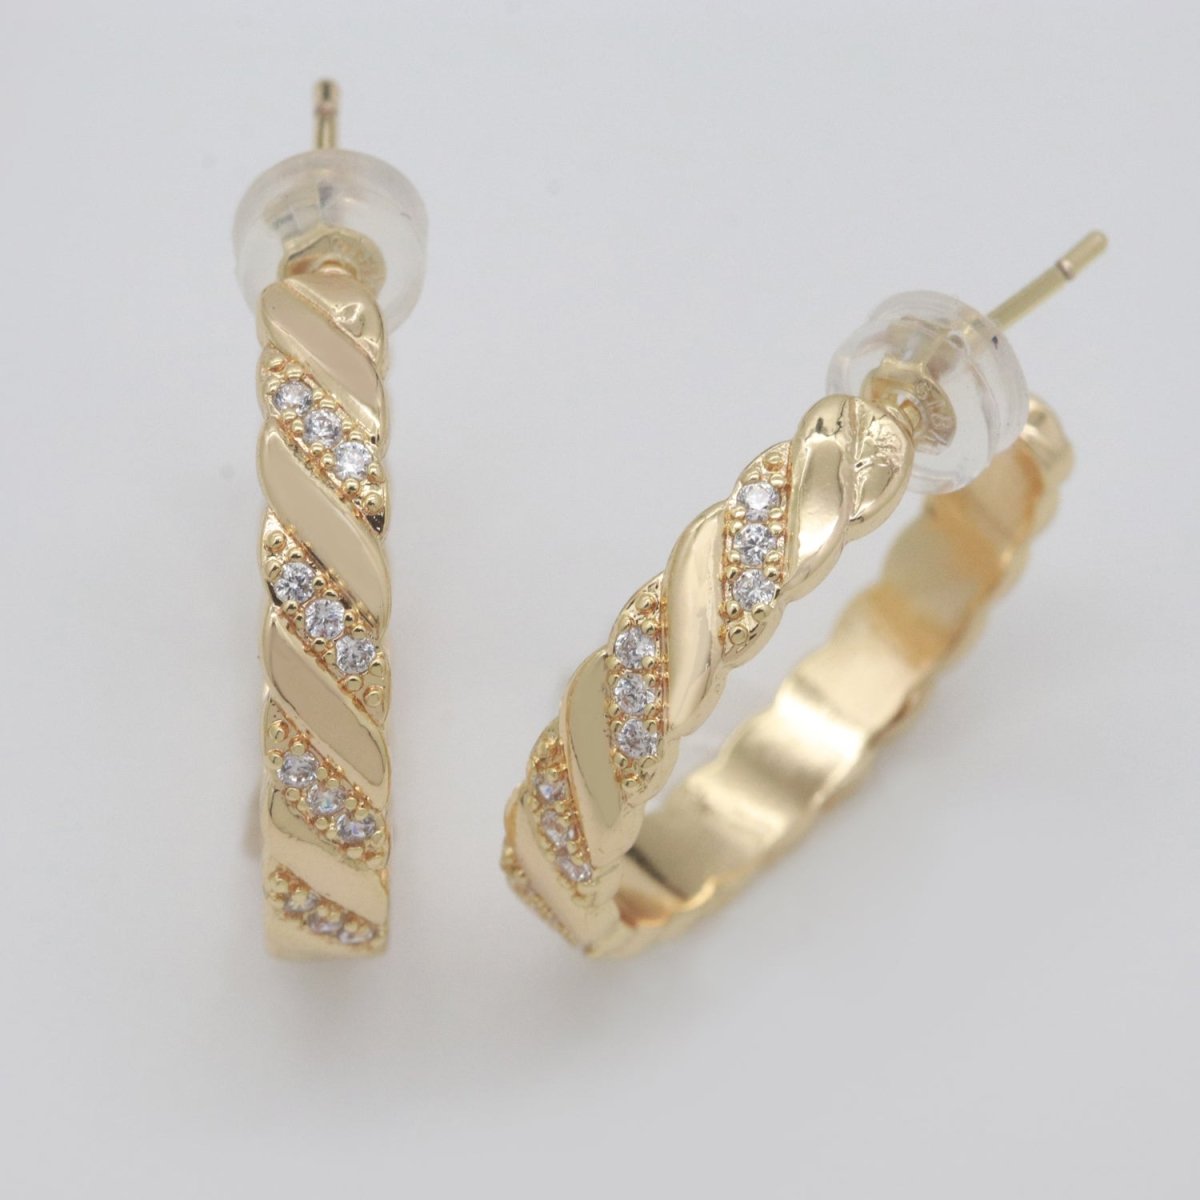 Gold Twisted Cz Earring for Christmas Gift Idea T-157 - DLUXCA